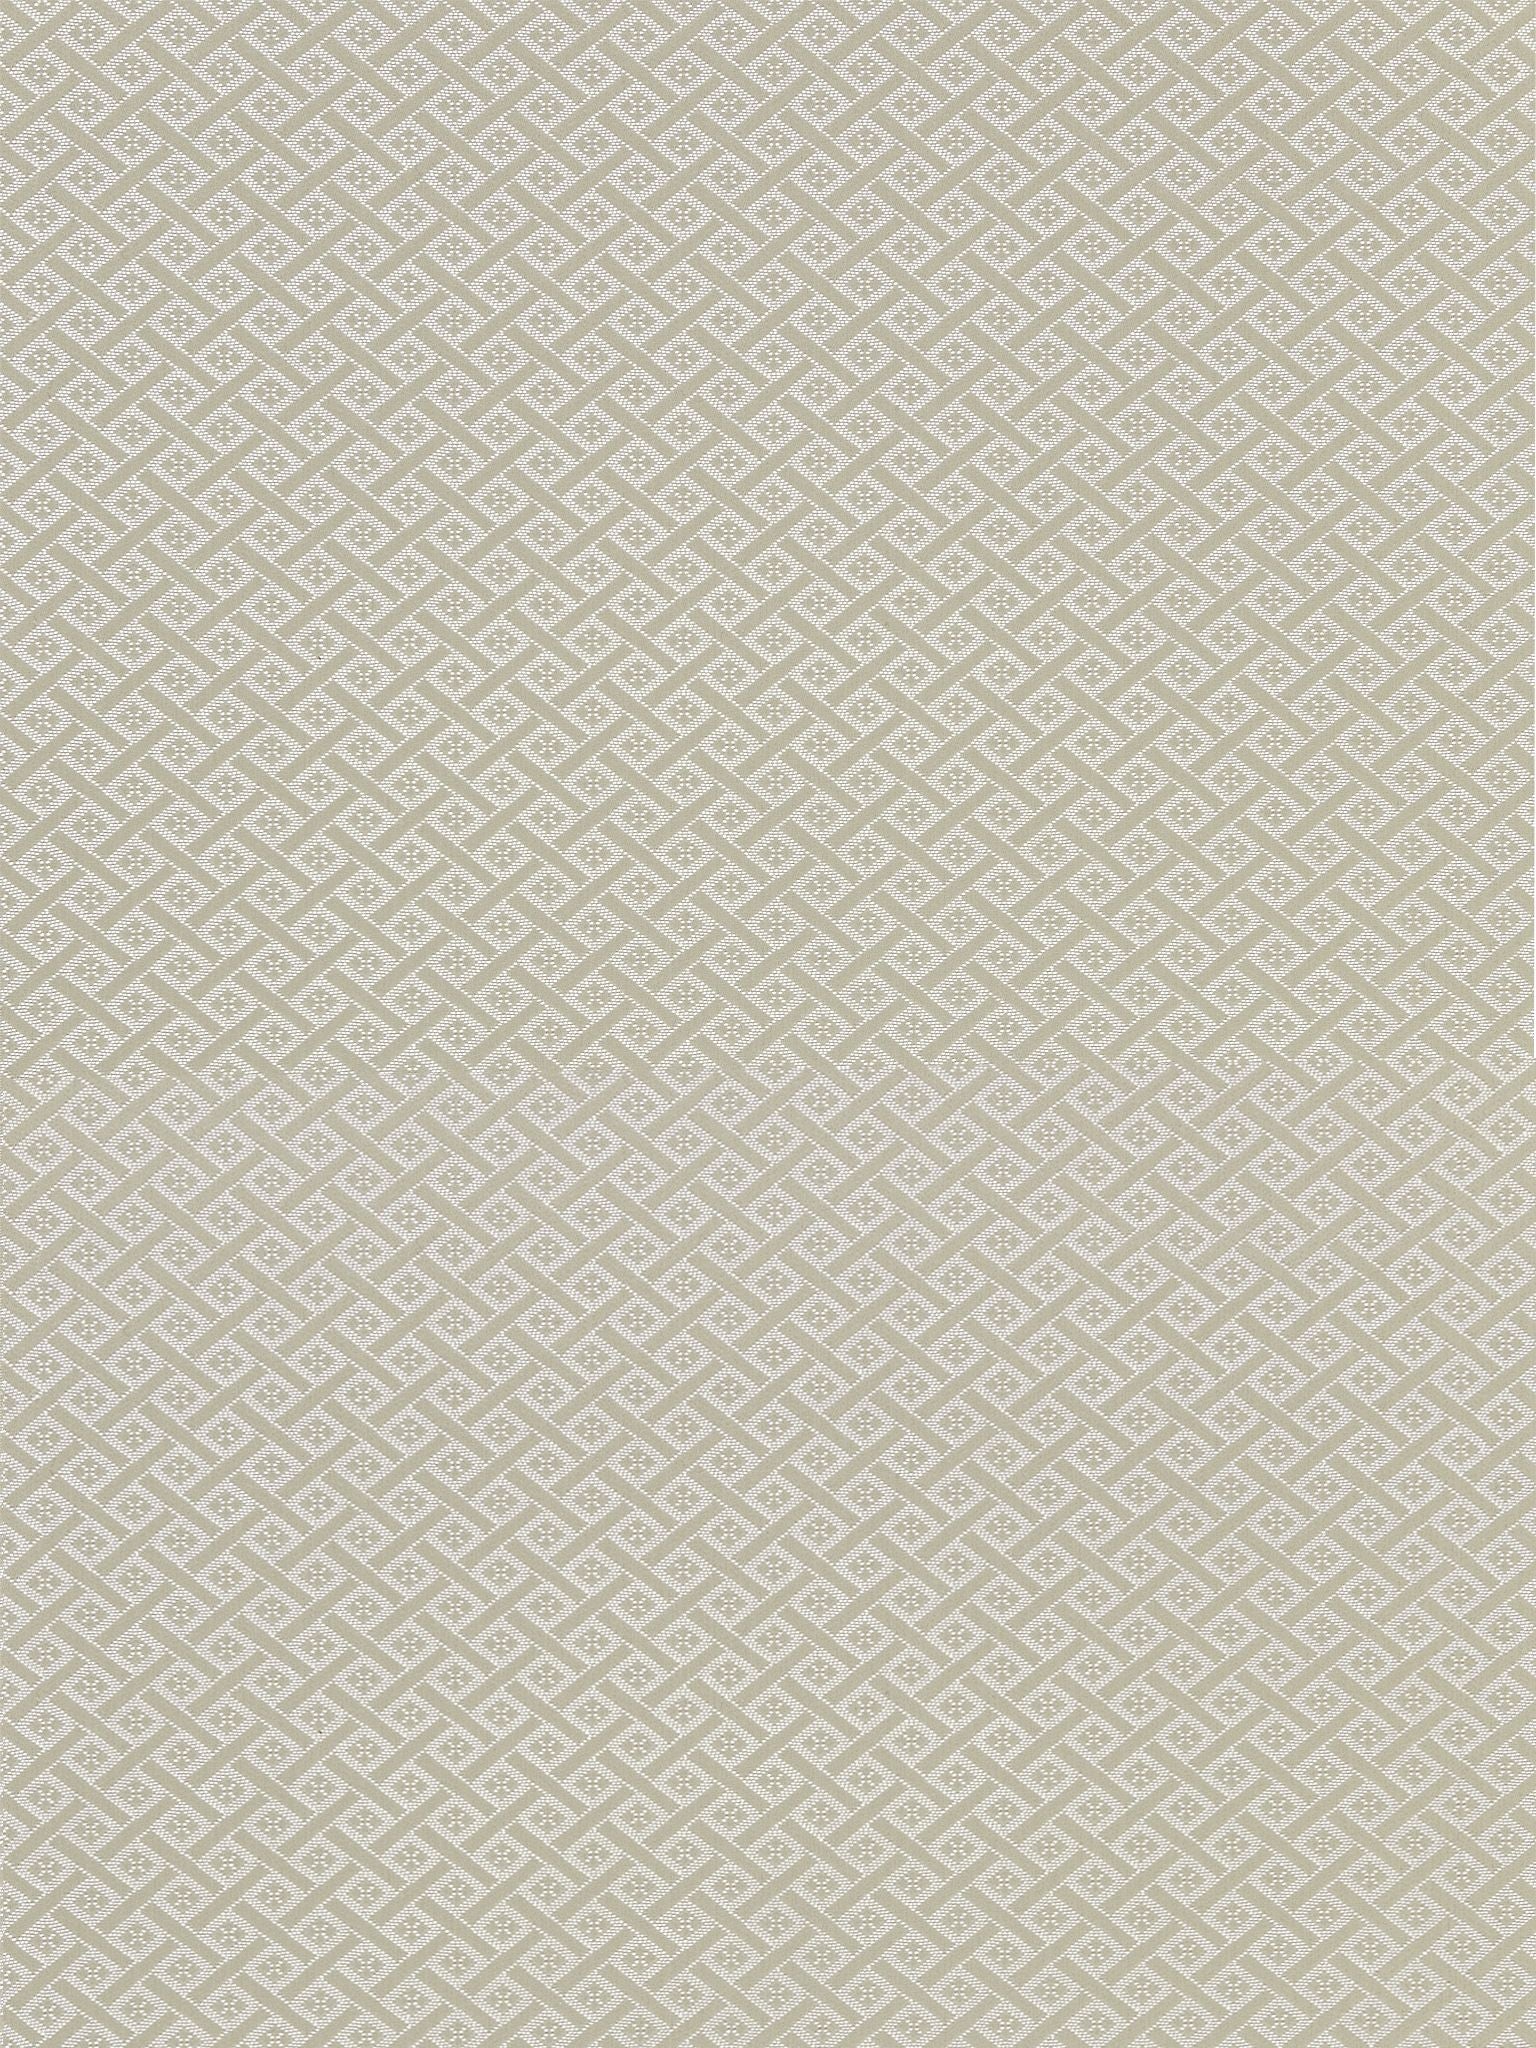 Diamante Matelasse fabric in fawn color - pattern number SC 000127223 - by Scalamandre in the Scalamandre Fabrics Book 1 collection